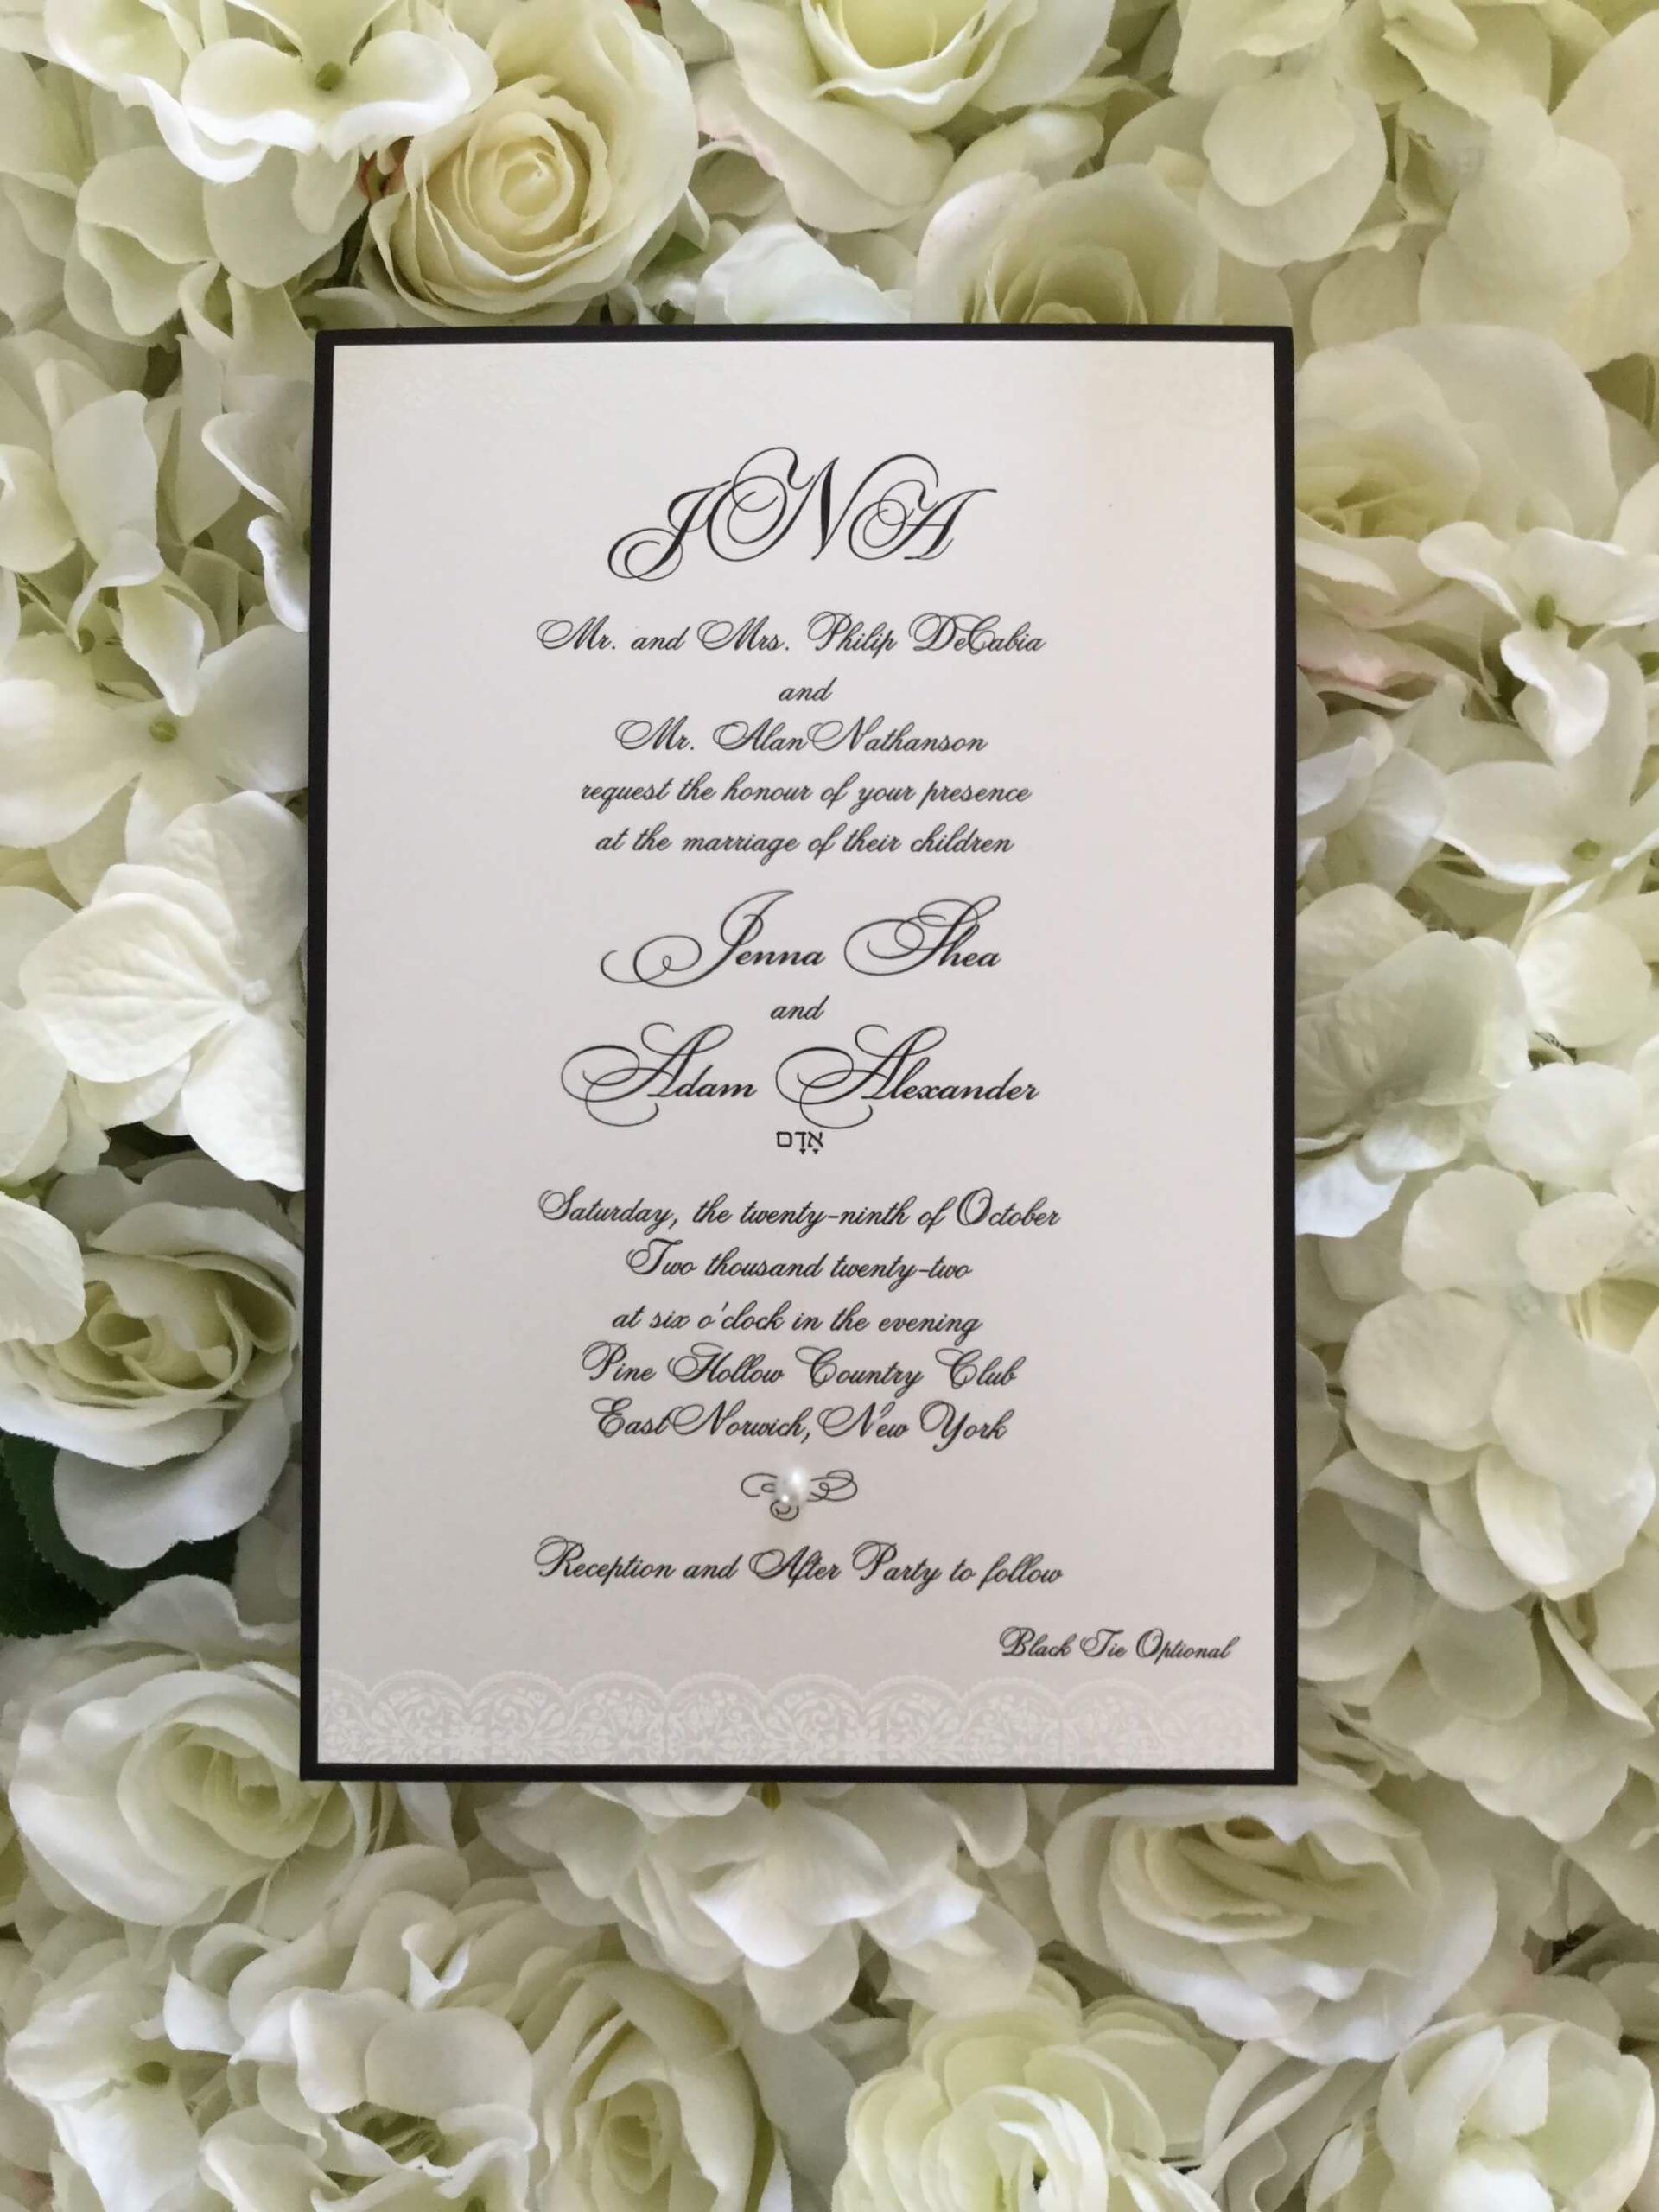 Pine Hollow Country Club wedding Invitation ivory and black-01